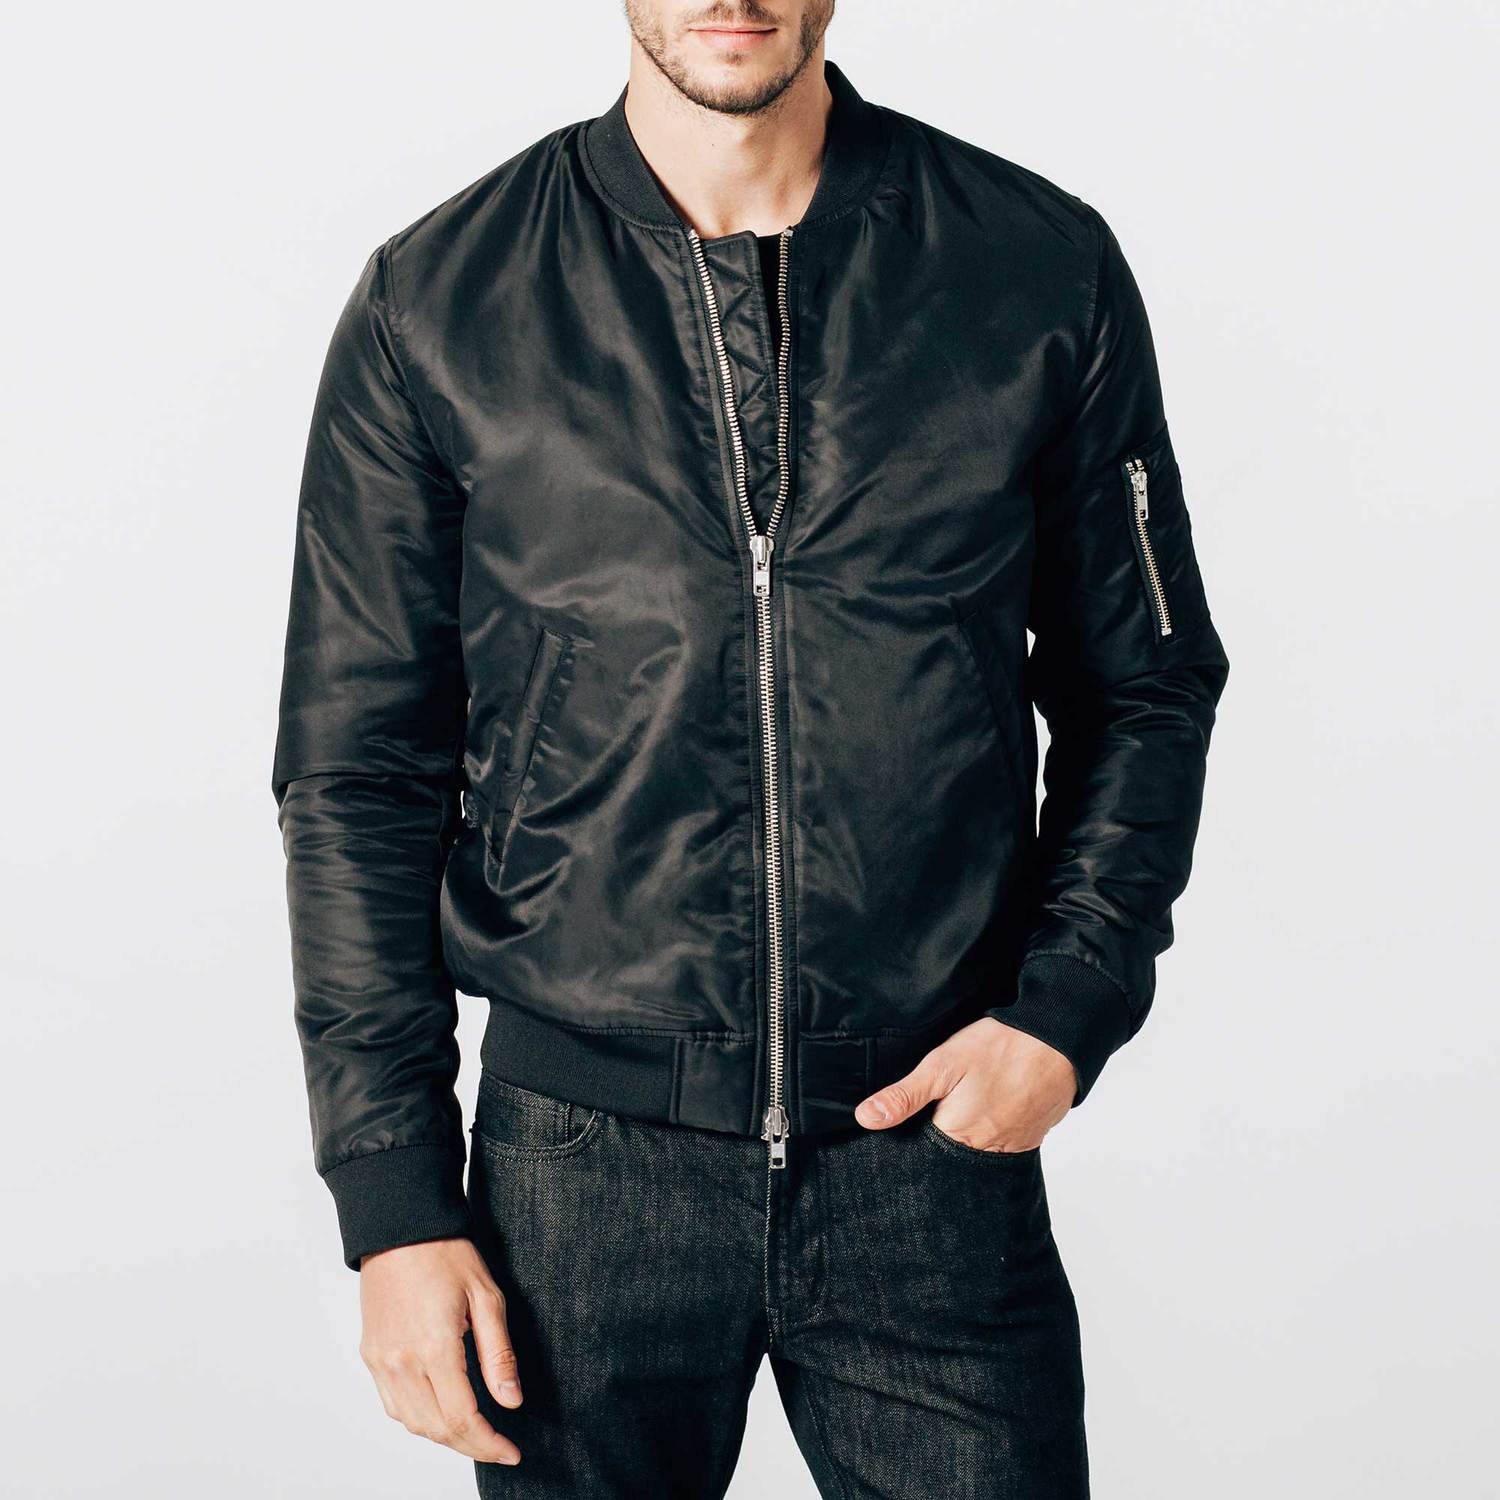 Mens Nylon Bomber Jacket With Silver Zippers In Black $135 | DSTLD